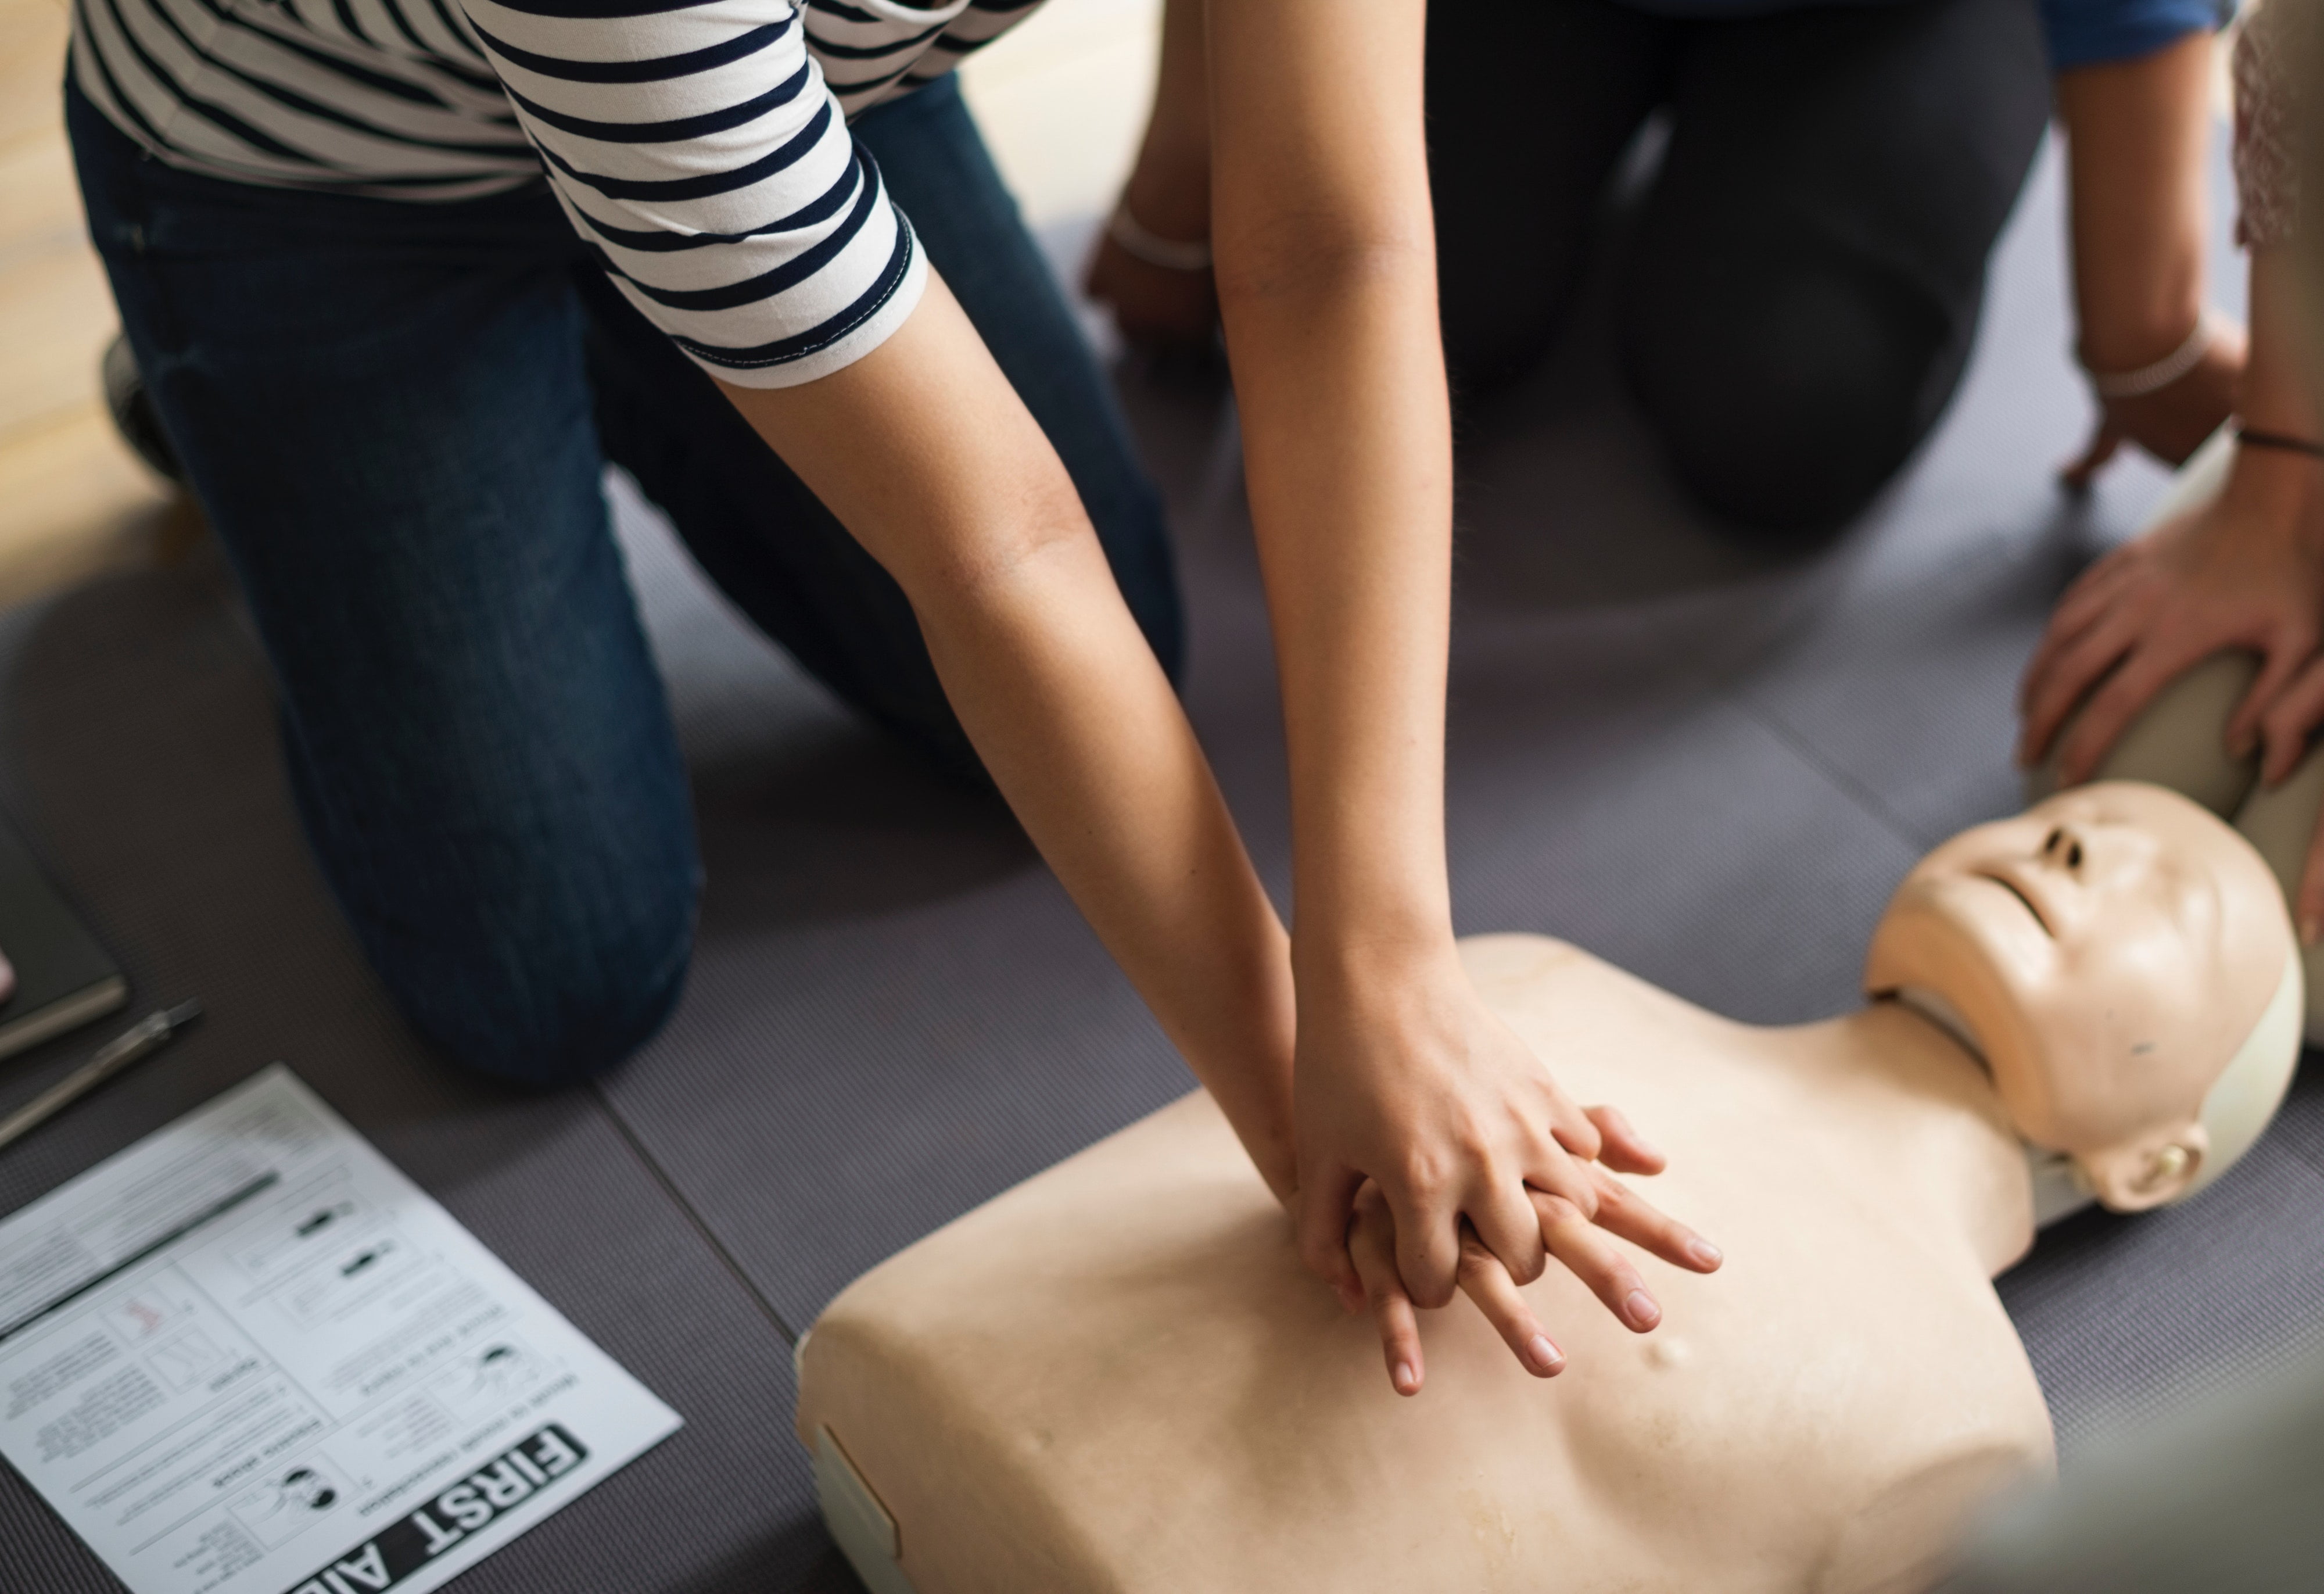 Provide First Aid for just $99